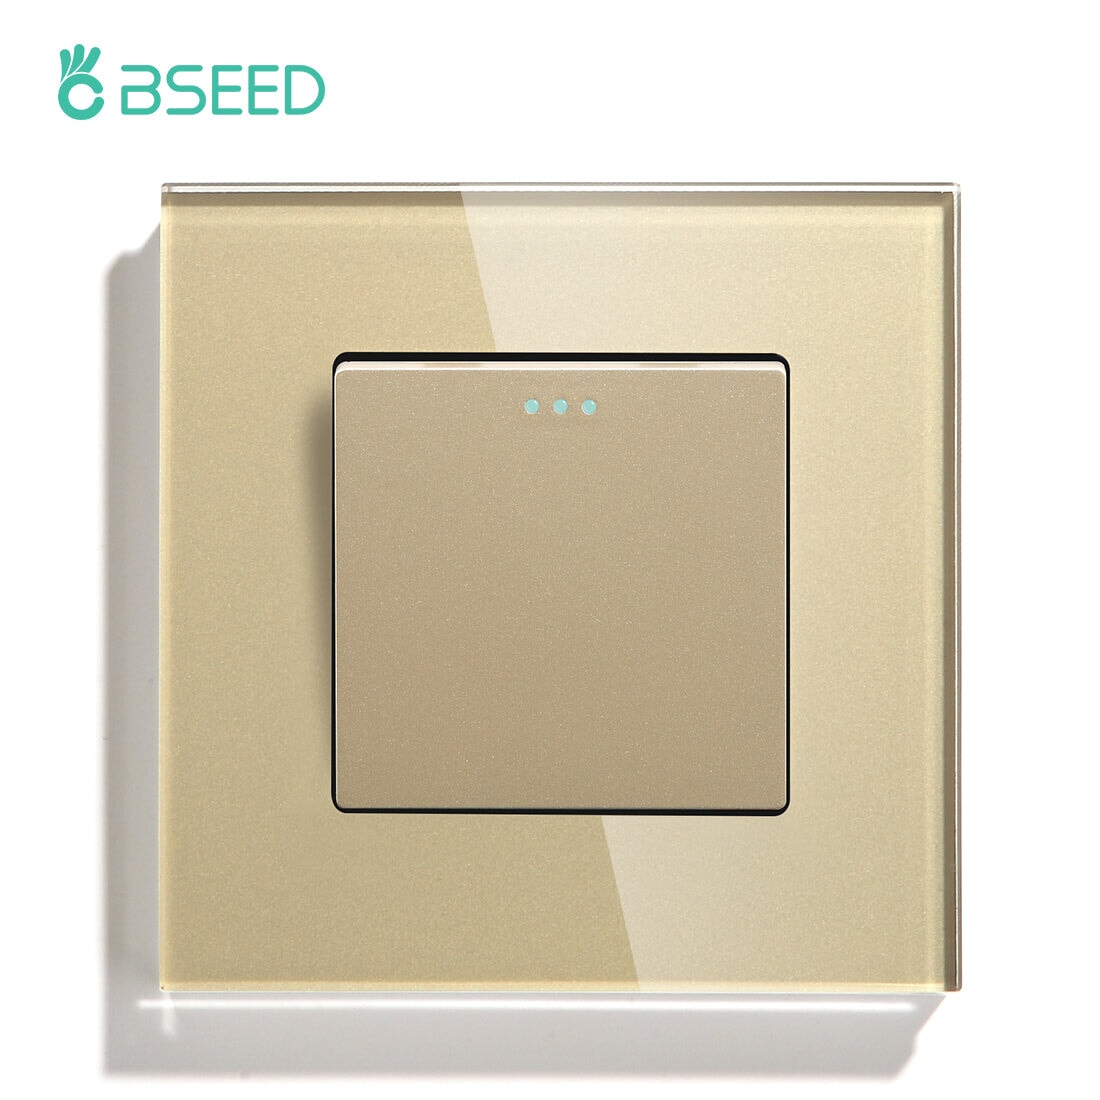 BSEED Wall Switches Automatic Rebound 1/2Gang 1Way Glass Mechanical Light Switches Reset Switches Return to Initial Position Light Switches Bseedswitch Golden 1Gang 